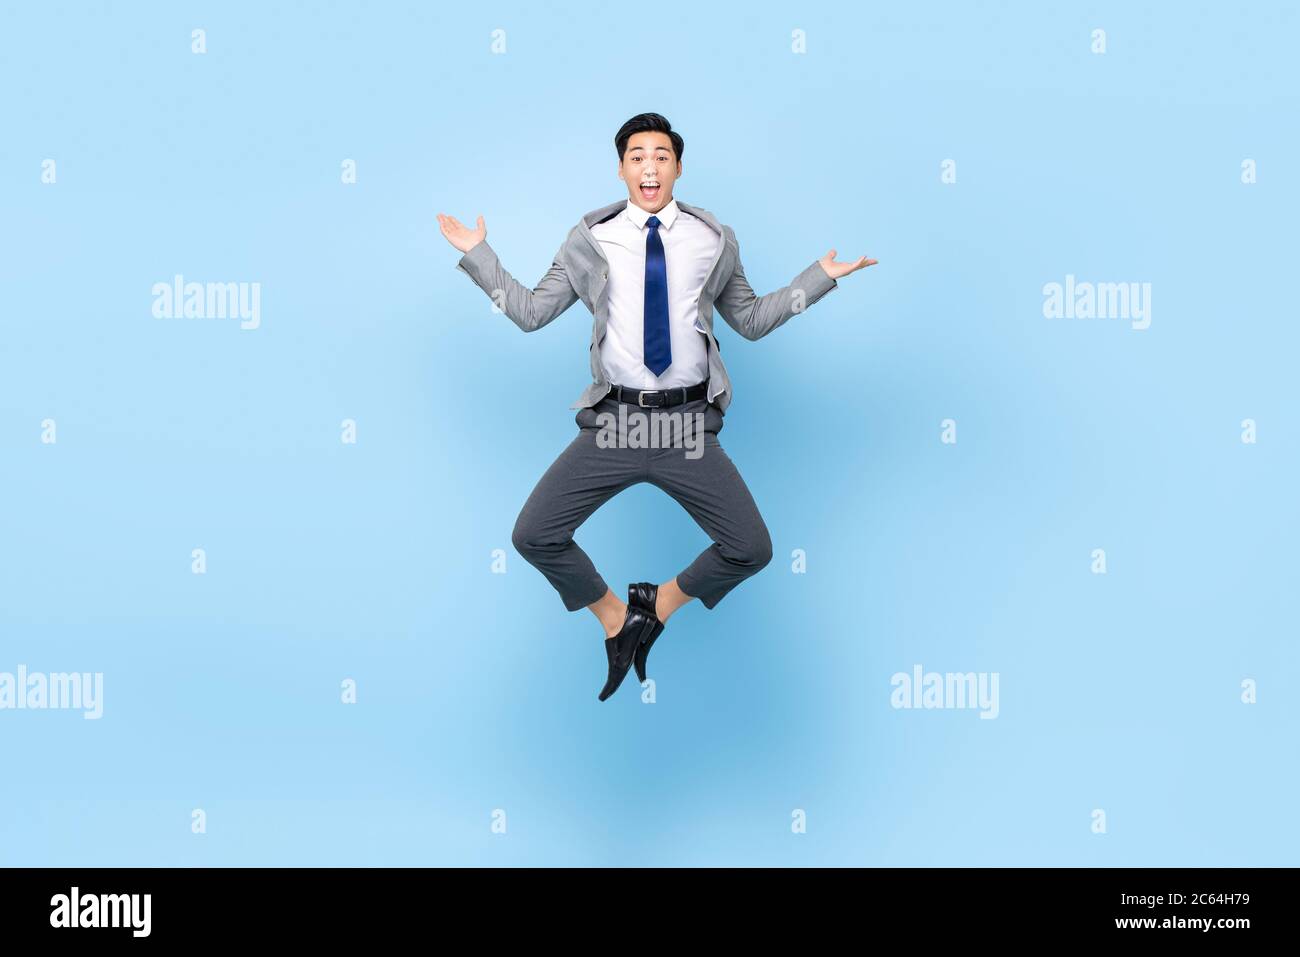 Full length playful portrait of happy ecstatic young Asian businessman jumping in mid-air doing wacky fun gesture in isolated studio blue background Stock Photo